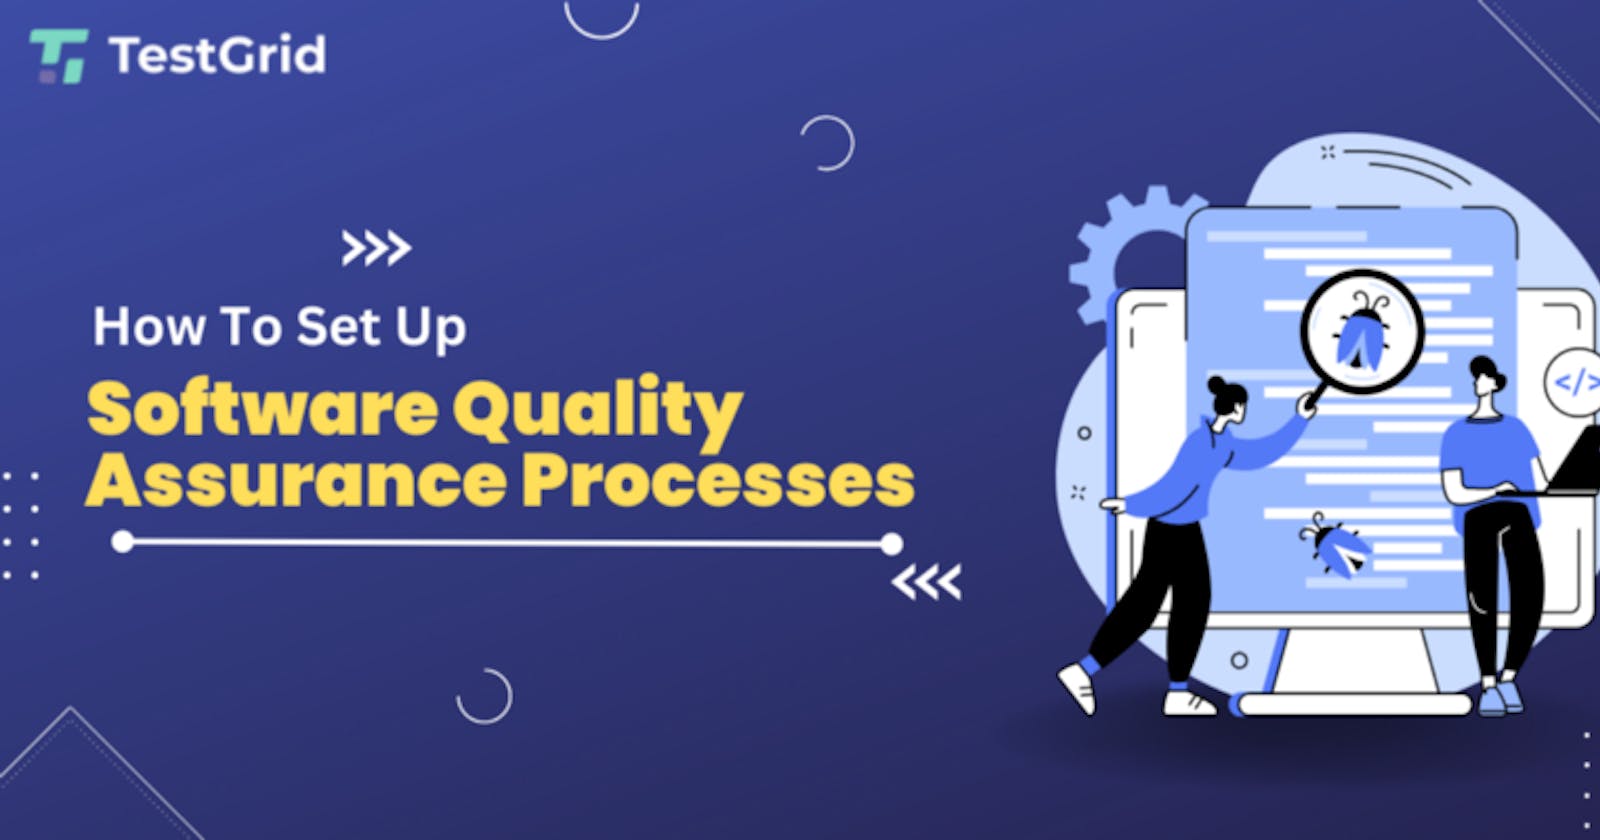 How To Set Up Software Quality Assurance Process (SQAP) Effectively?